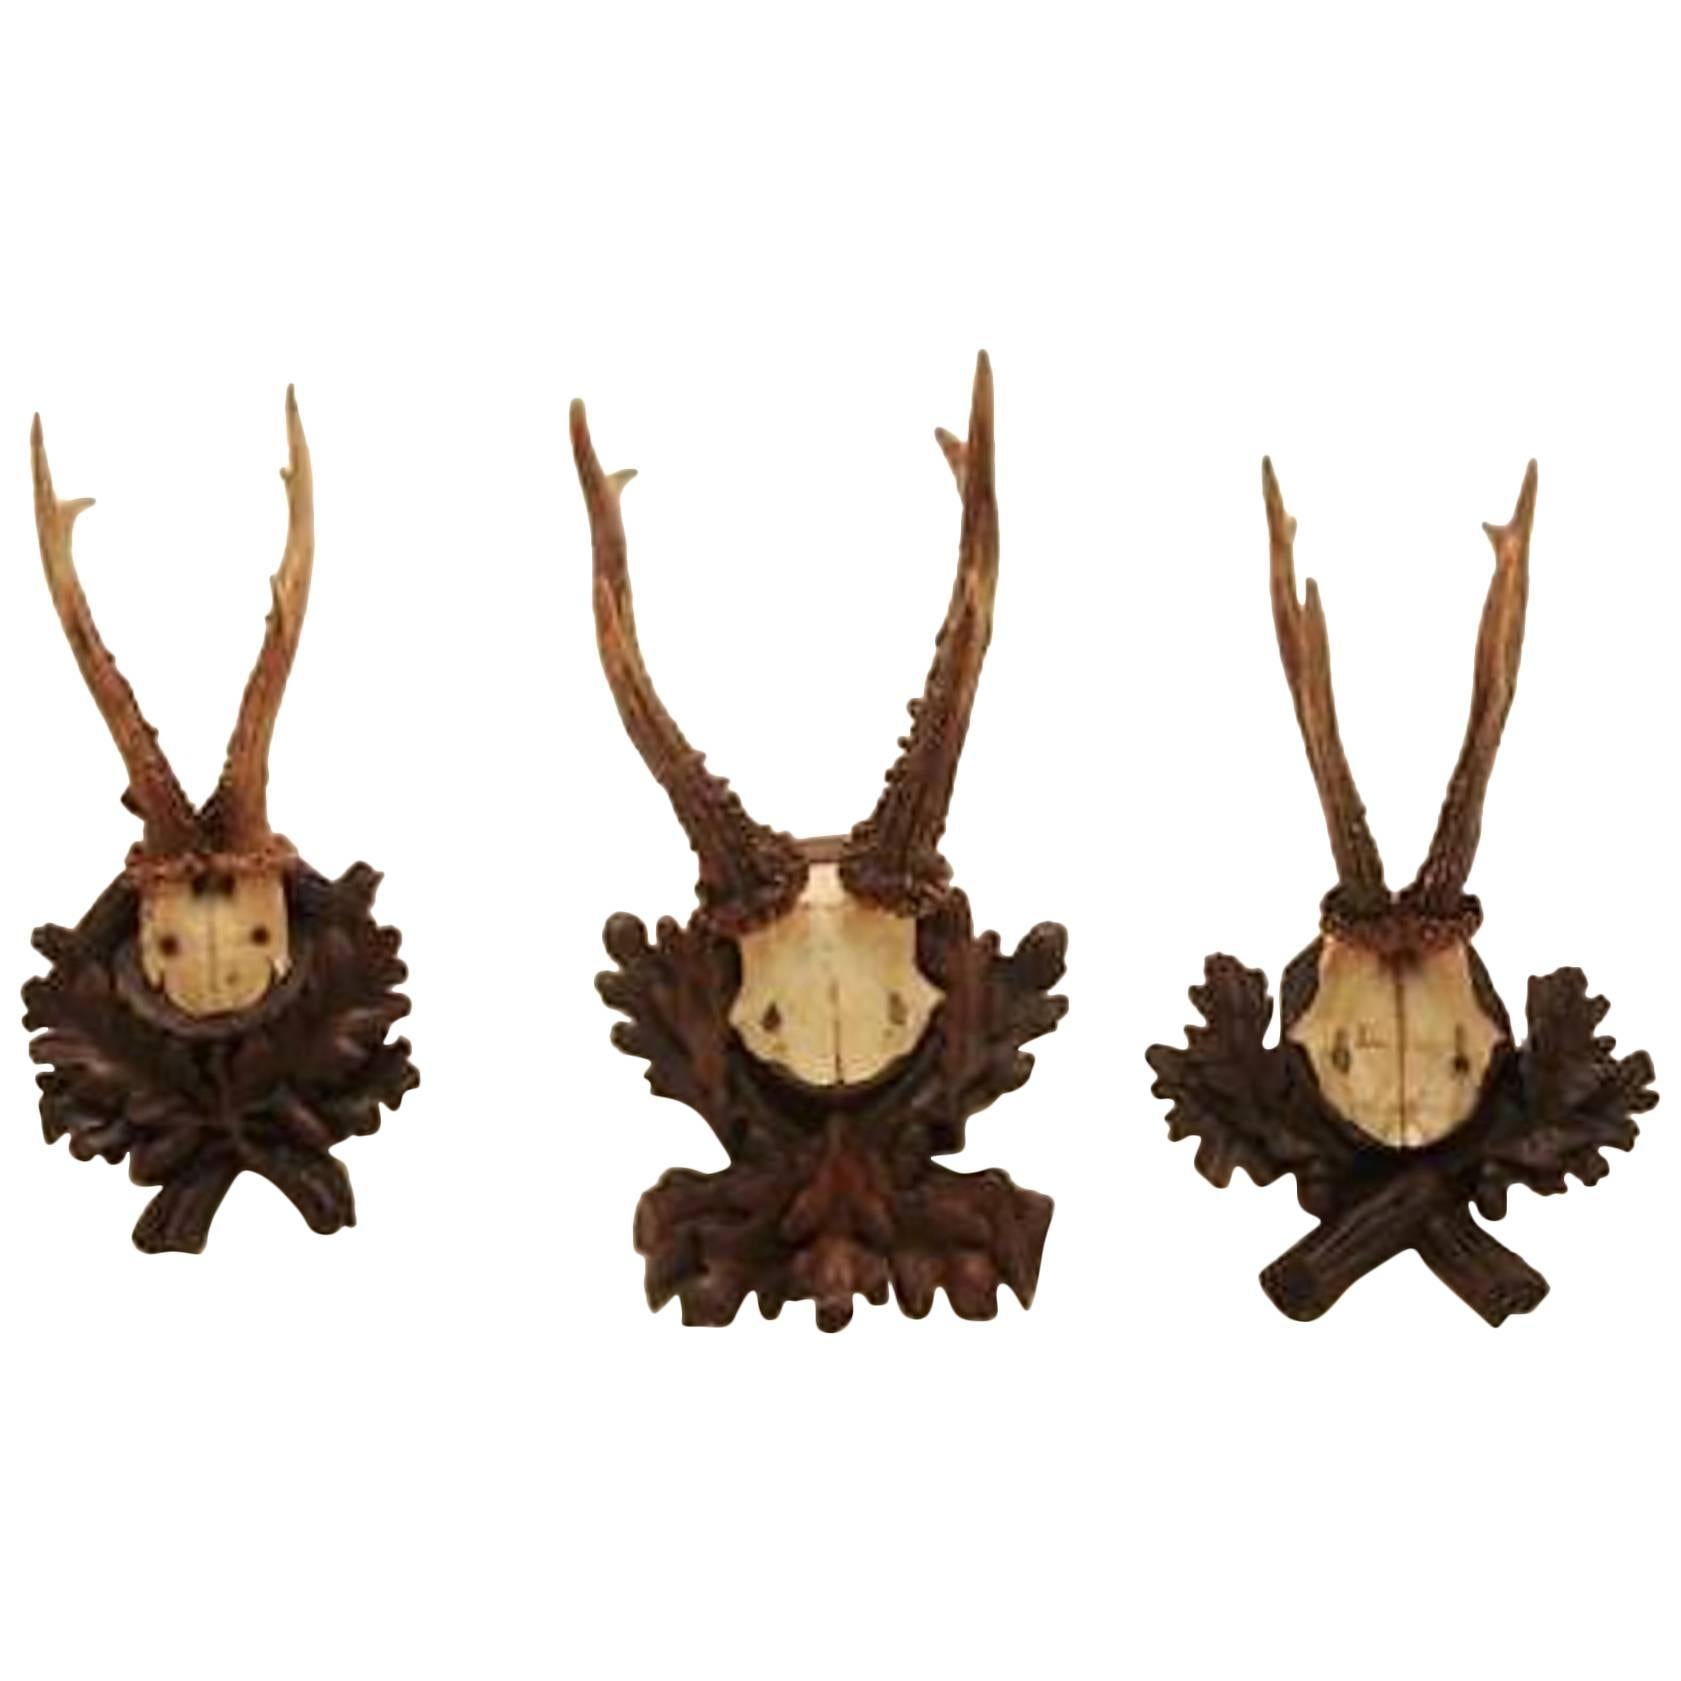 Collection of Nine Black Forest Antler Mounts on Hand-Carved Wood Plaques Priced For Sale